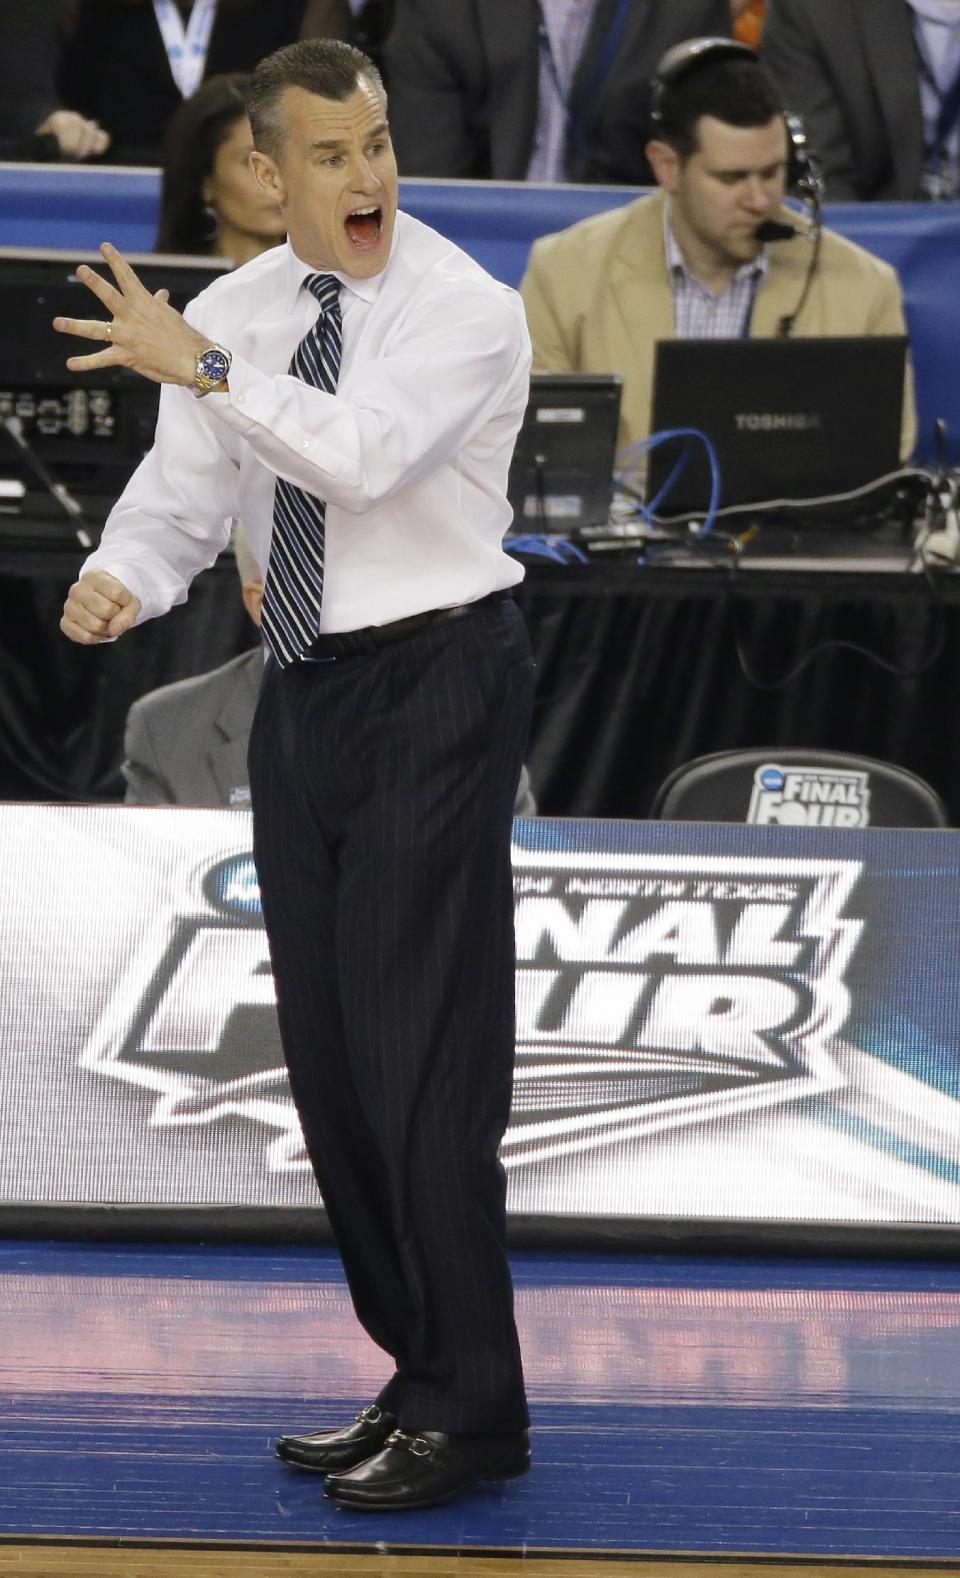 Florida head coach Billy Donovan reacts during the first half of an NCAA Final Four tournament college basketball semifinal game against Connecticut Saturday, April 5, 2014, in Arlington, Texas. (AP Photo/Tony Gutierrez)